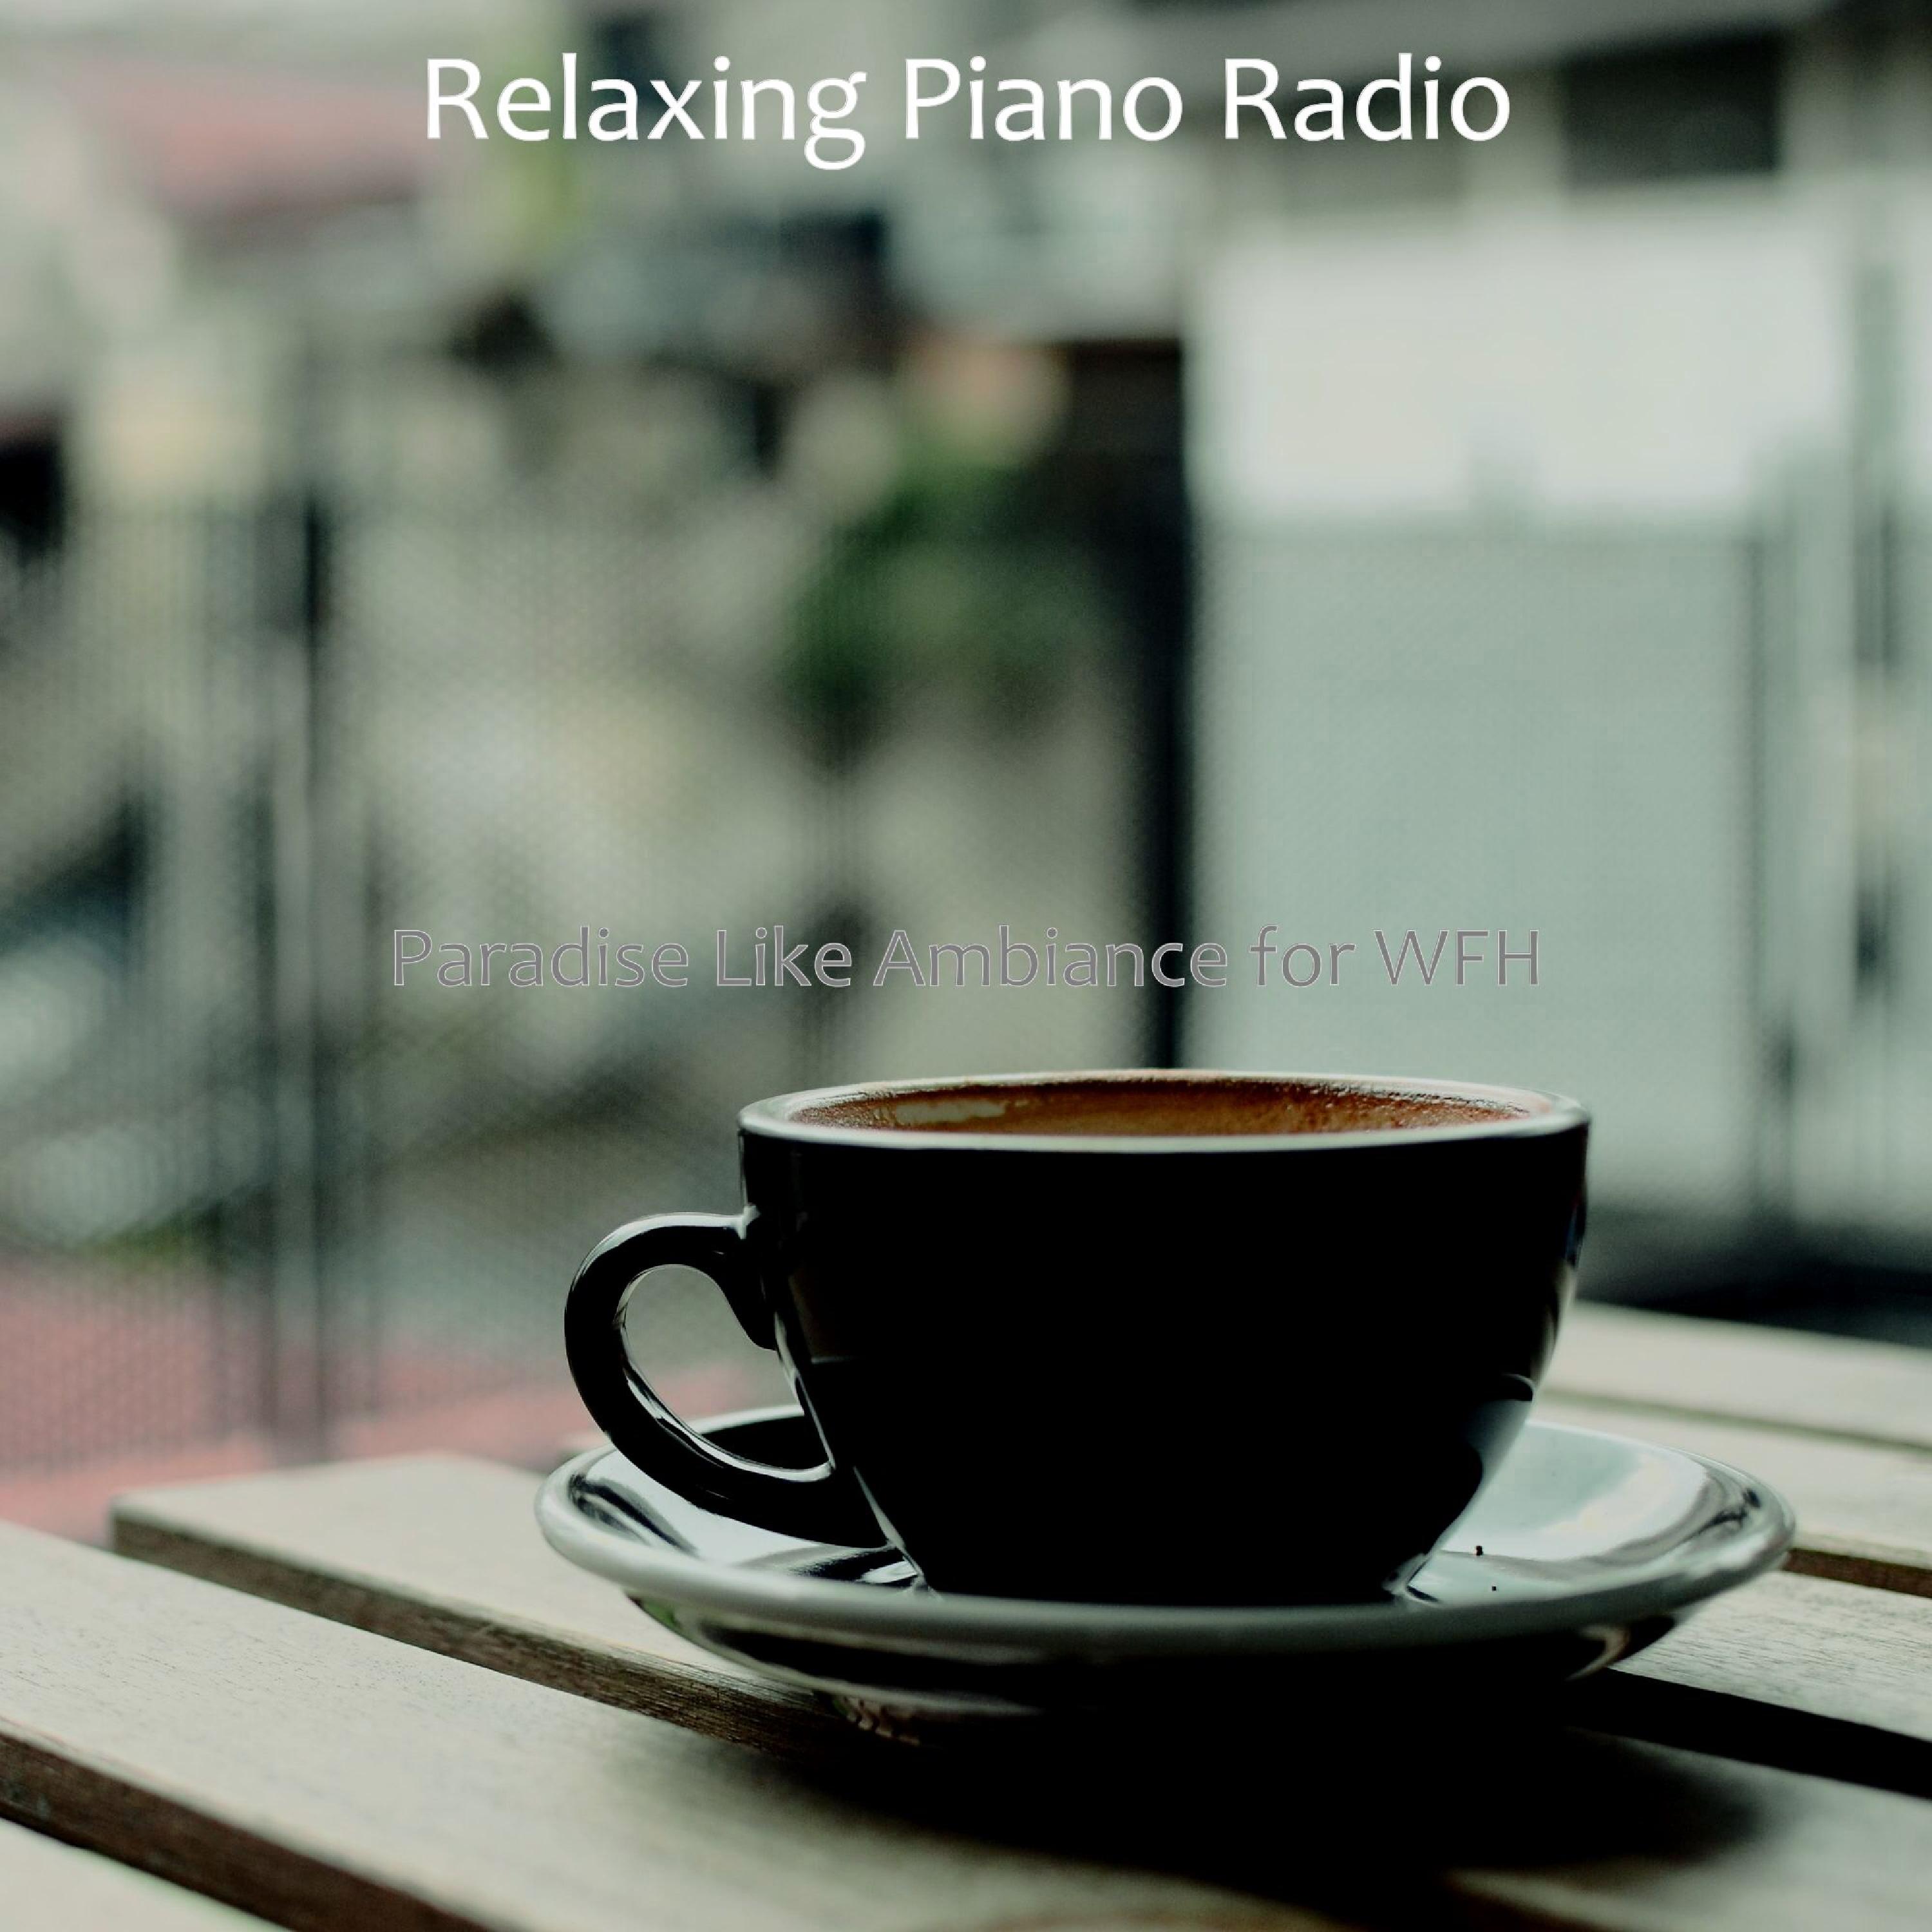 Relaxing Piano Radio - Happening Moods for Studying